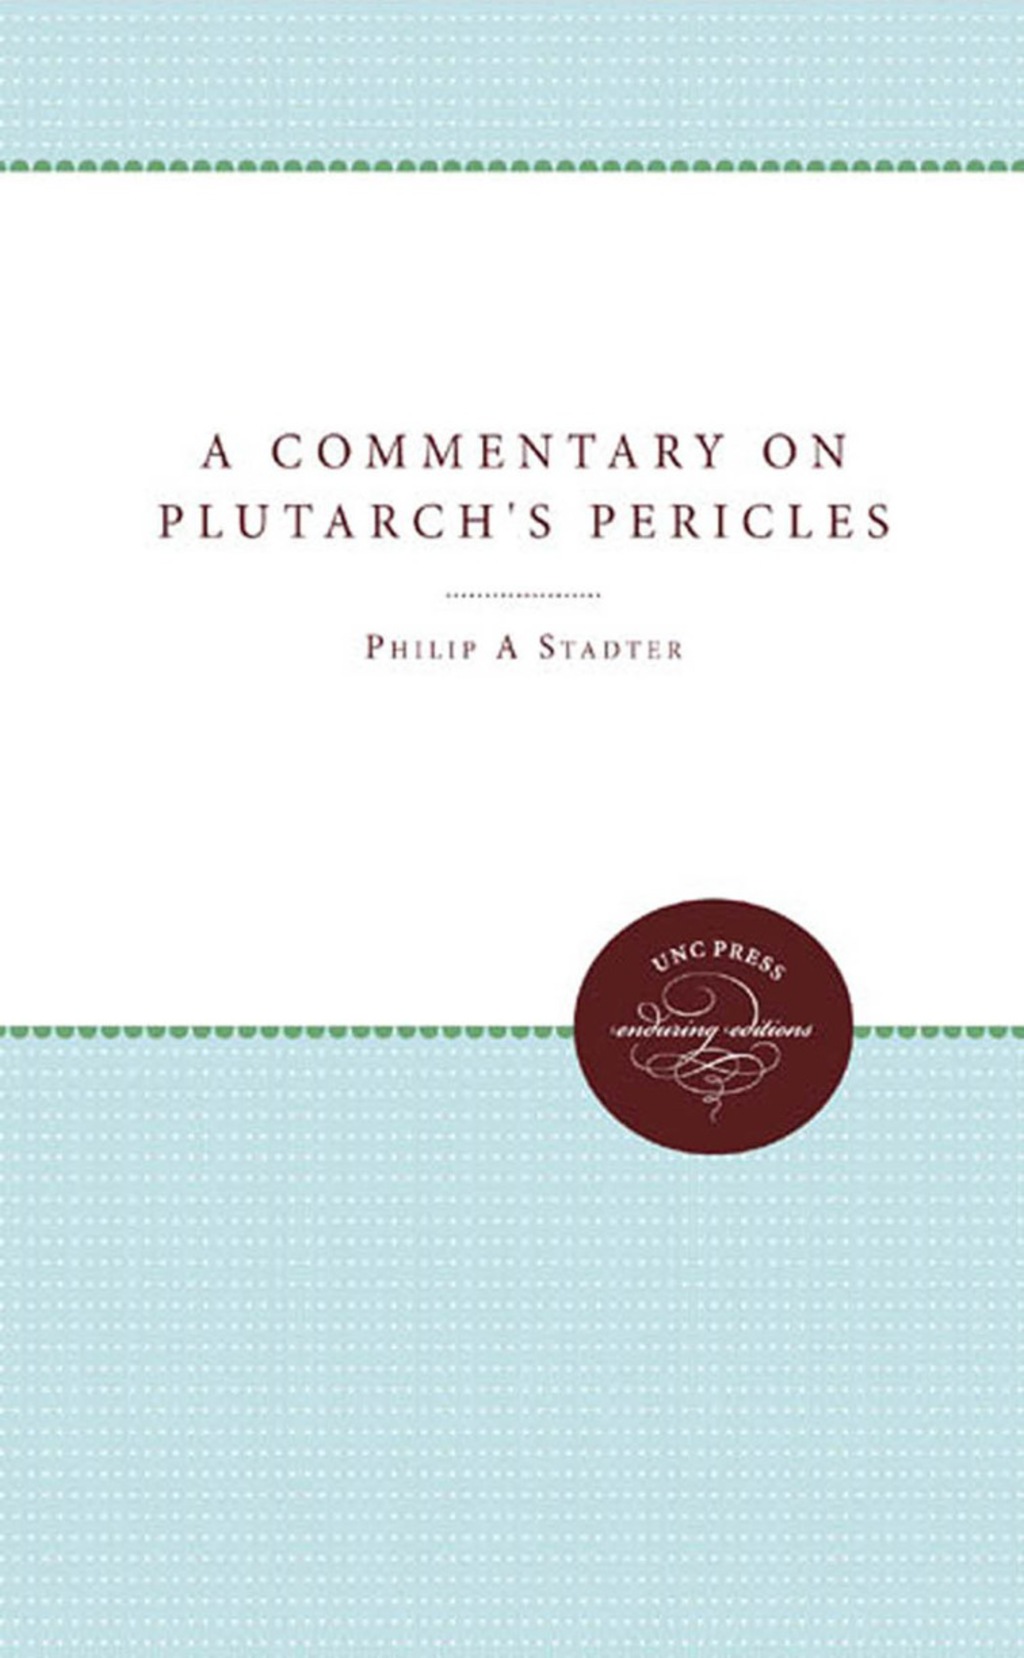 A Commentary on Plutarch's Pericles (eBook) - Philip A. Stadter,